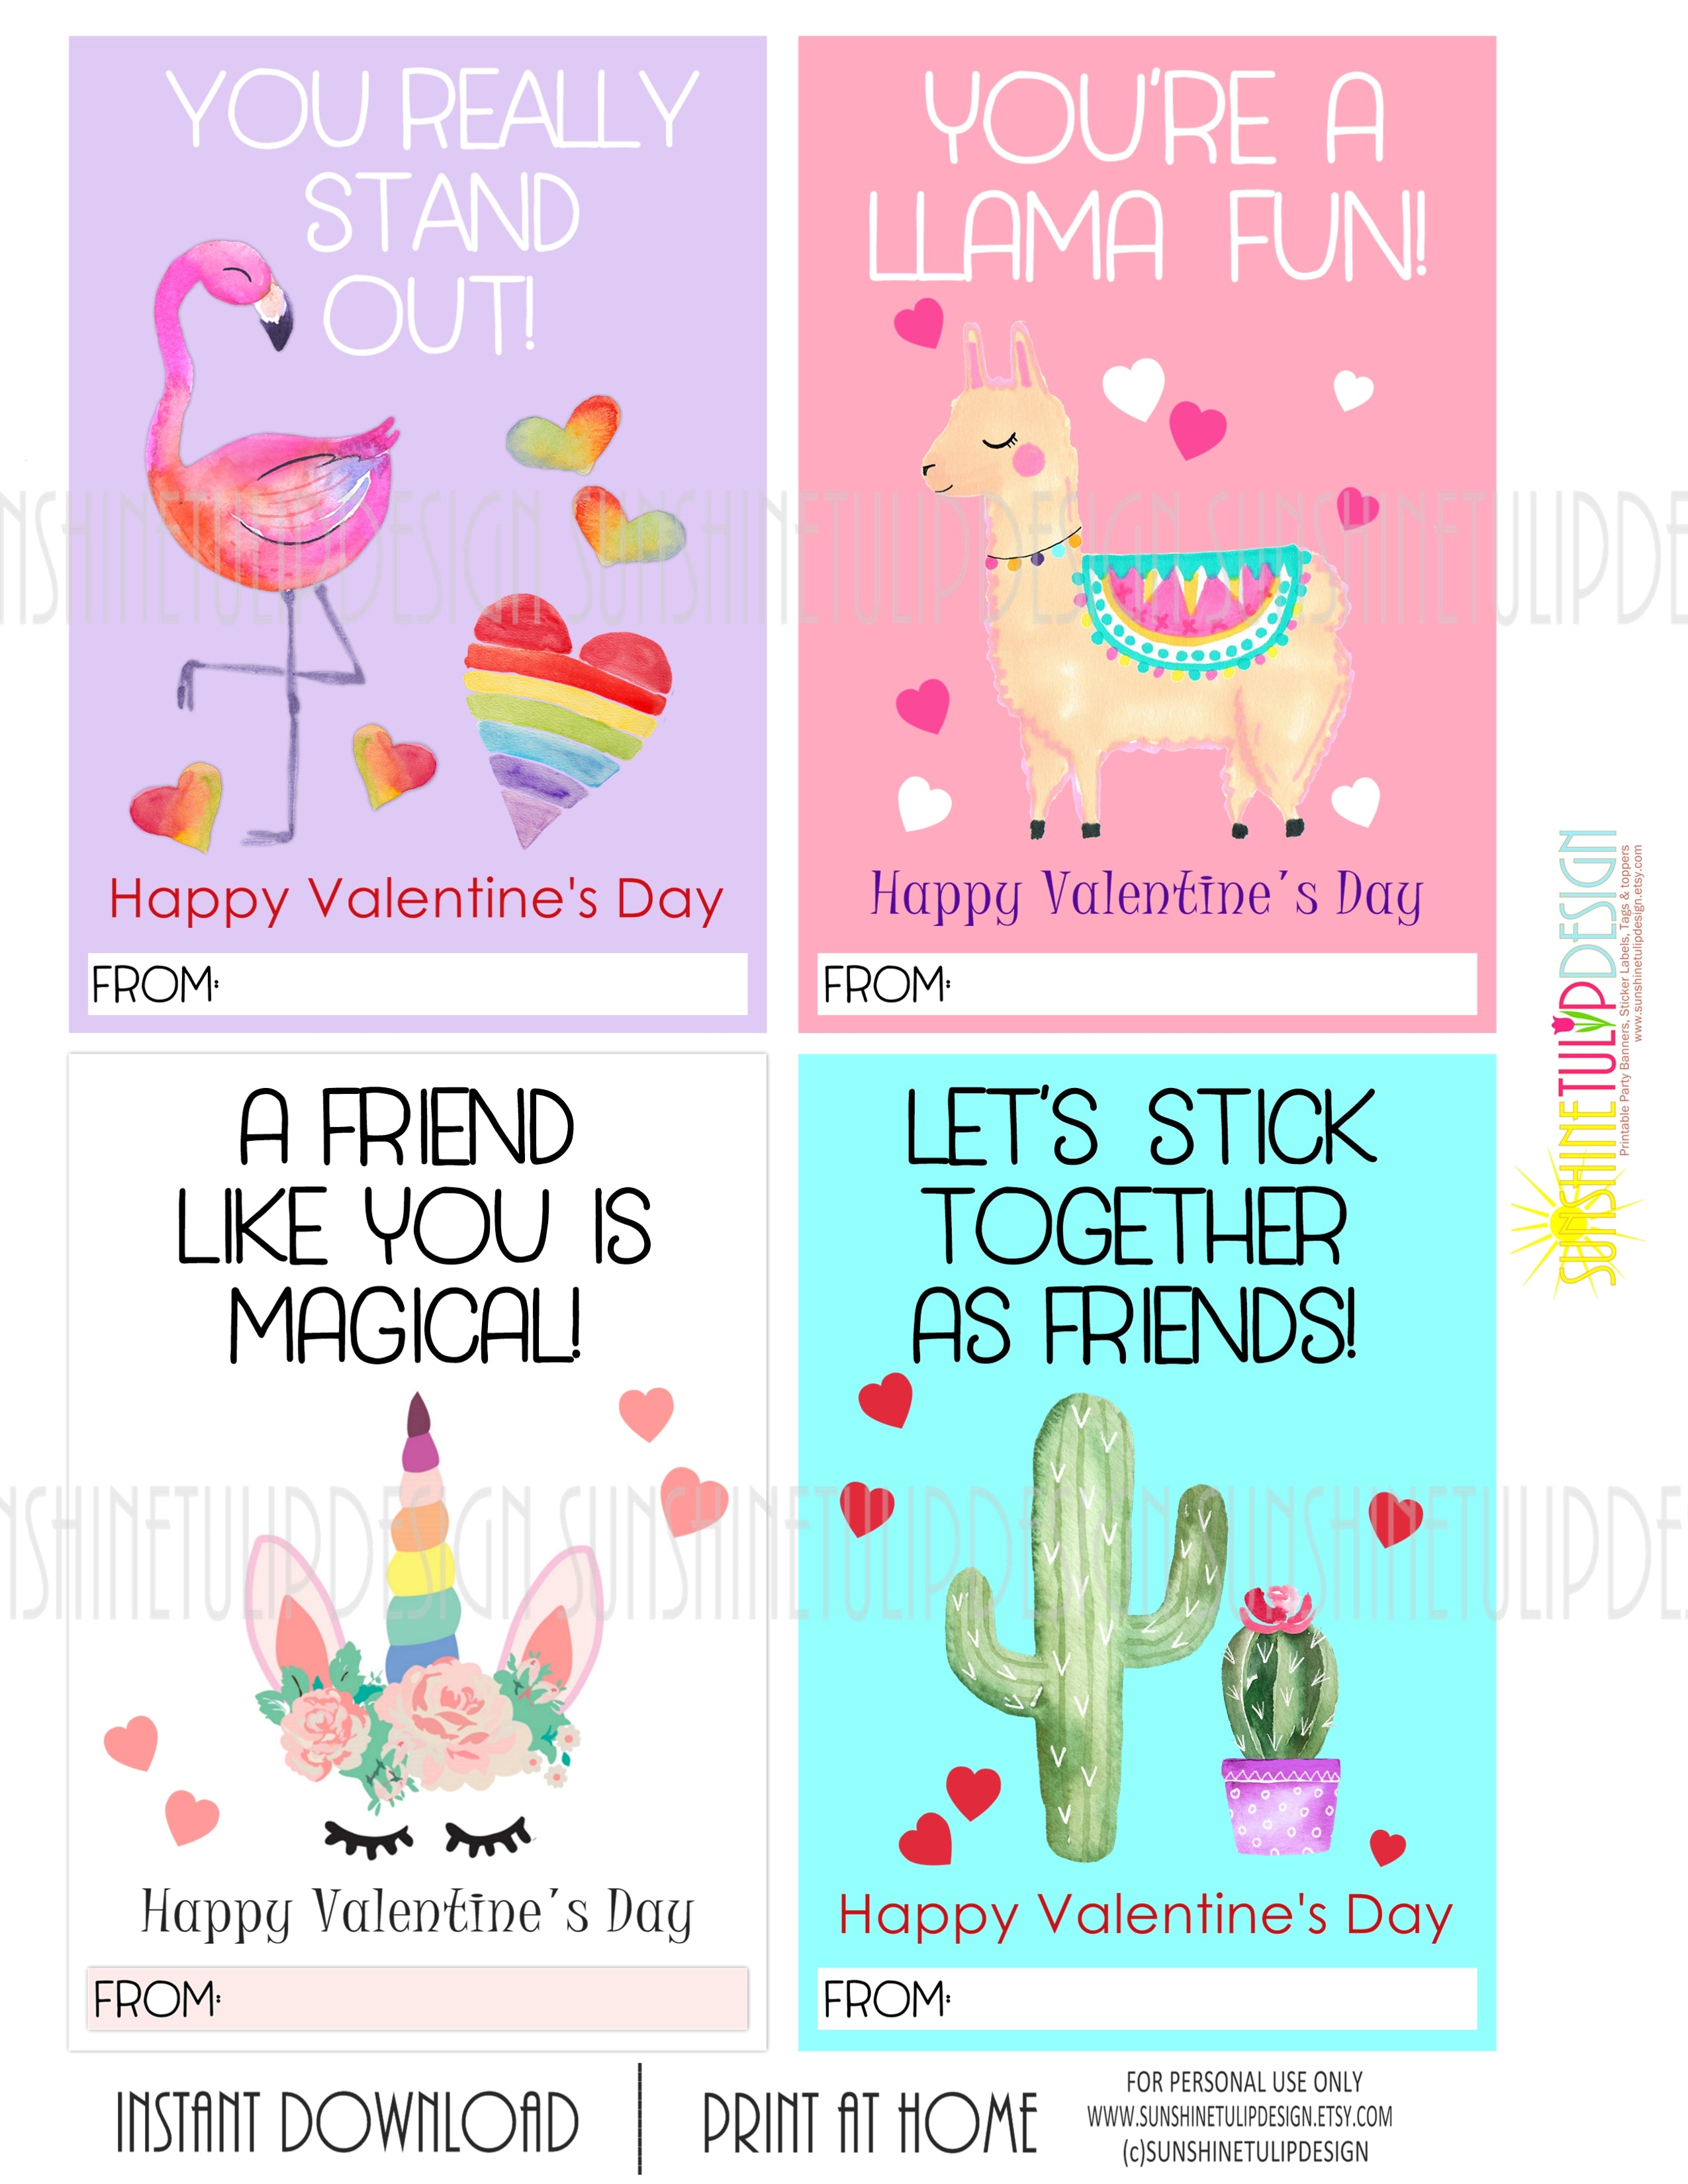 Printable Valentines Day Cards, Kid's Valentine's Cards, Instant Download  Pun Valentines Cards by SUNSHINETULIPDESIGN